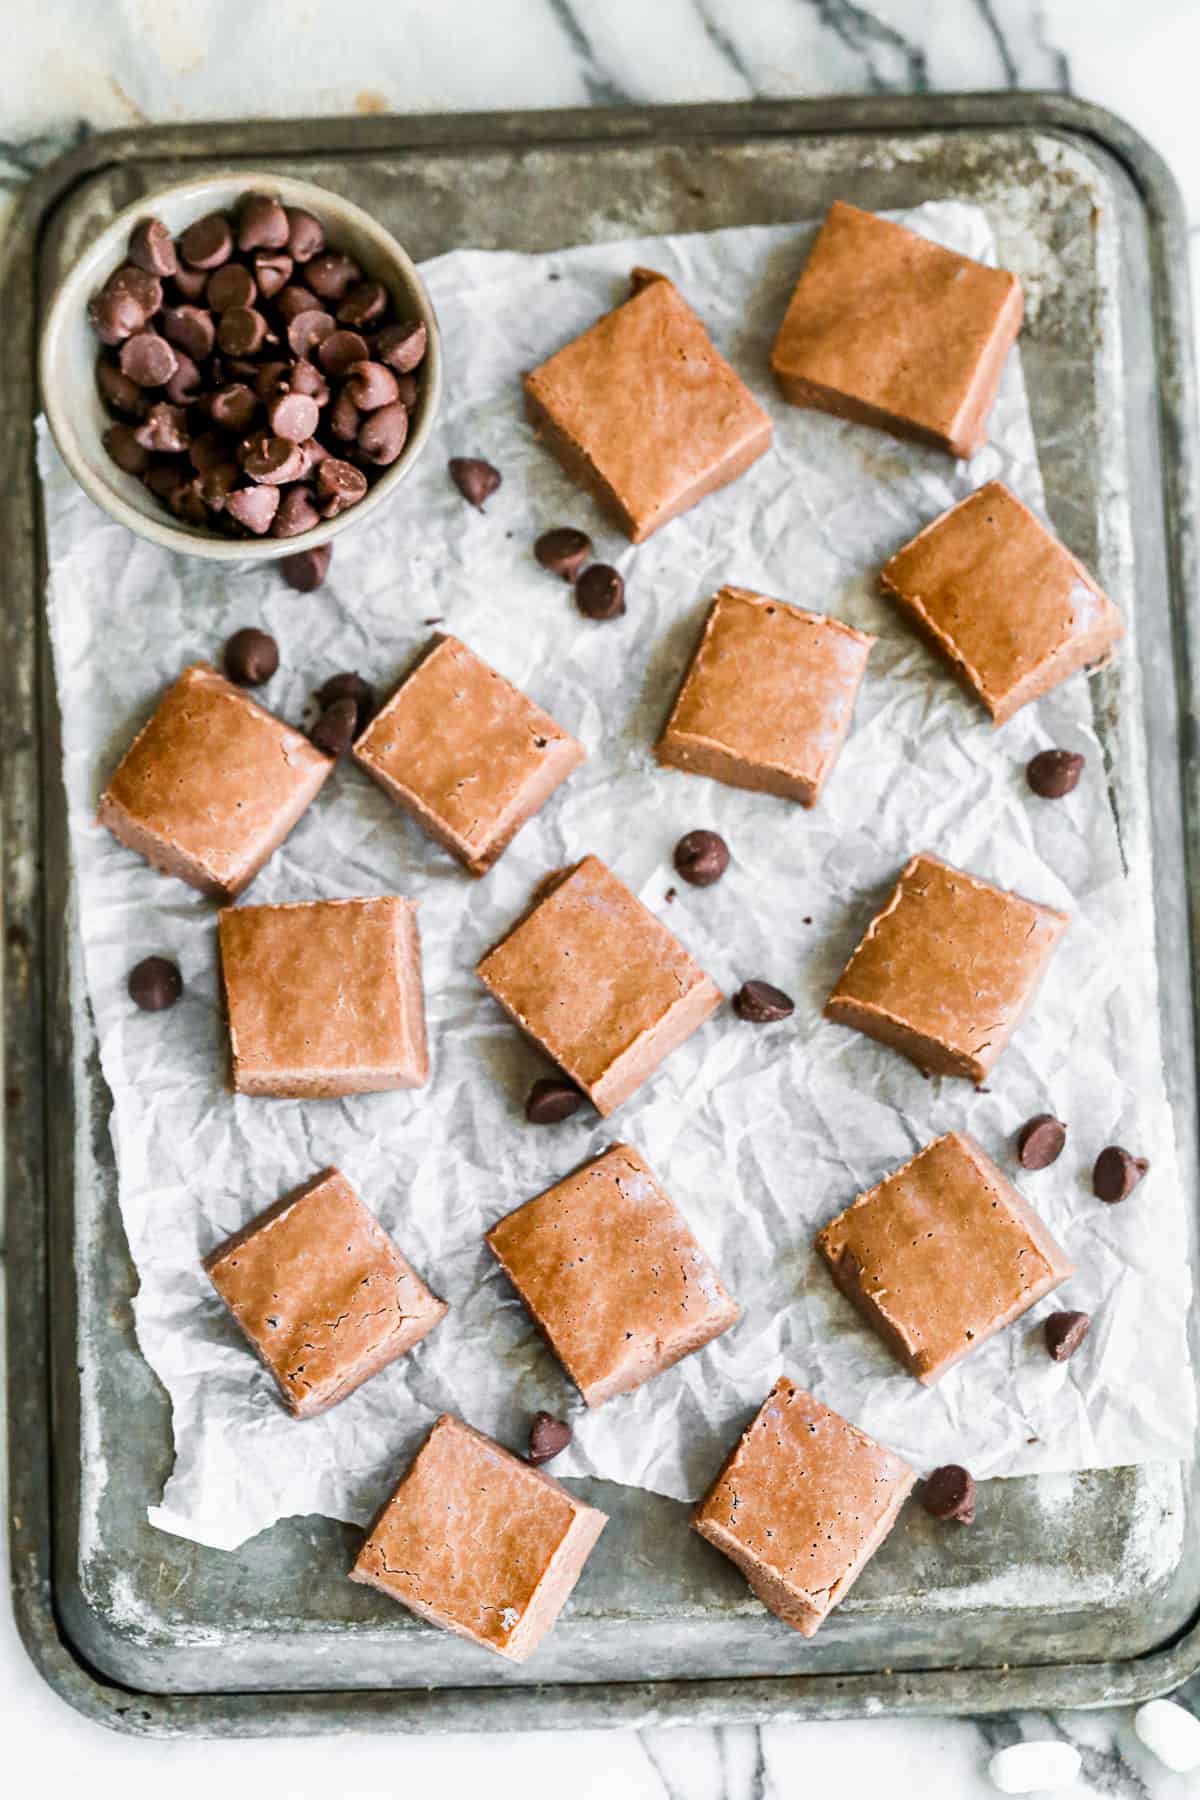 A simple fudge recipe, cut into squares on a piece of parchment paper, garnished with chocolate chips.